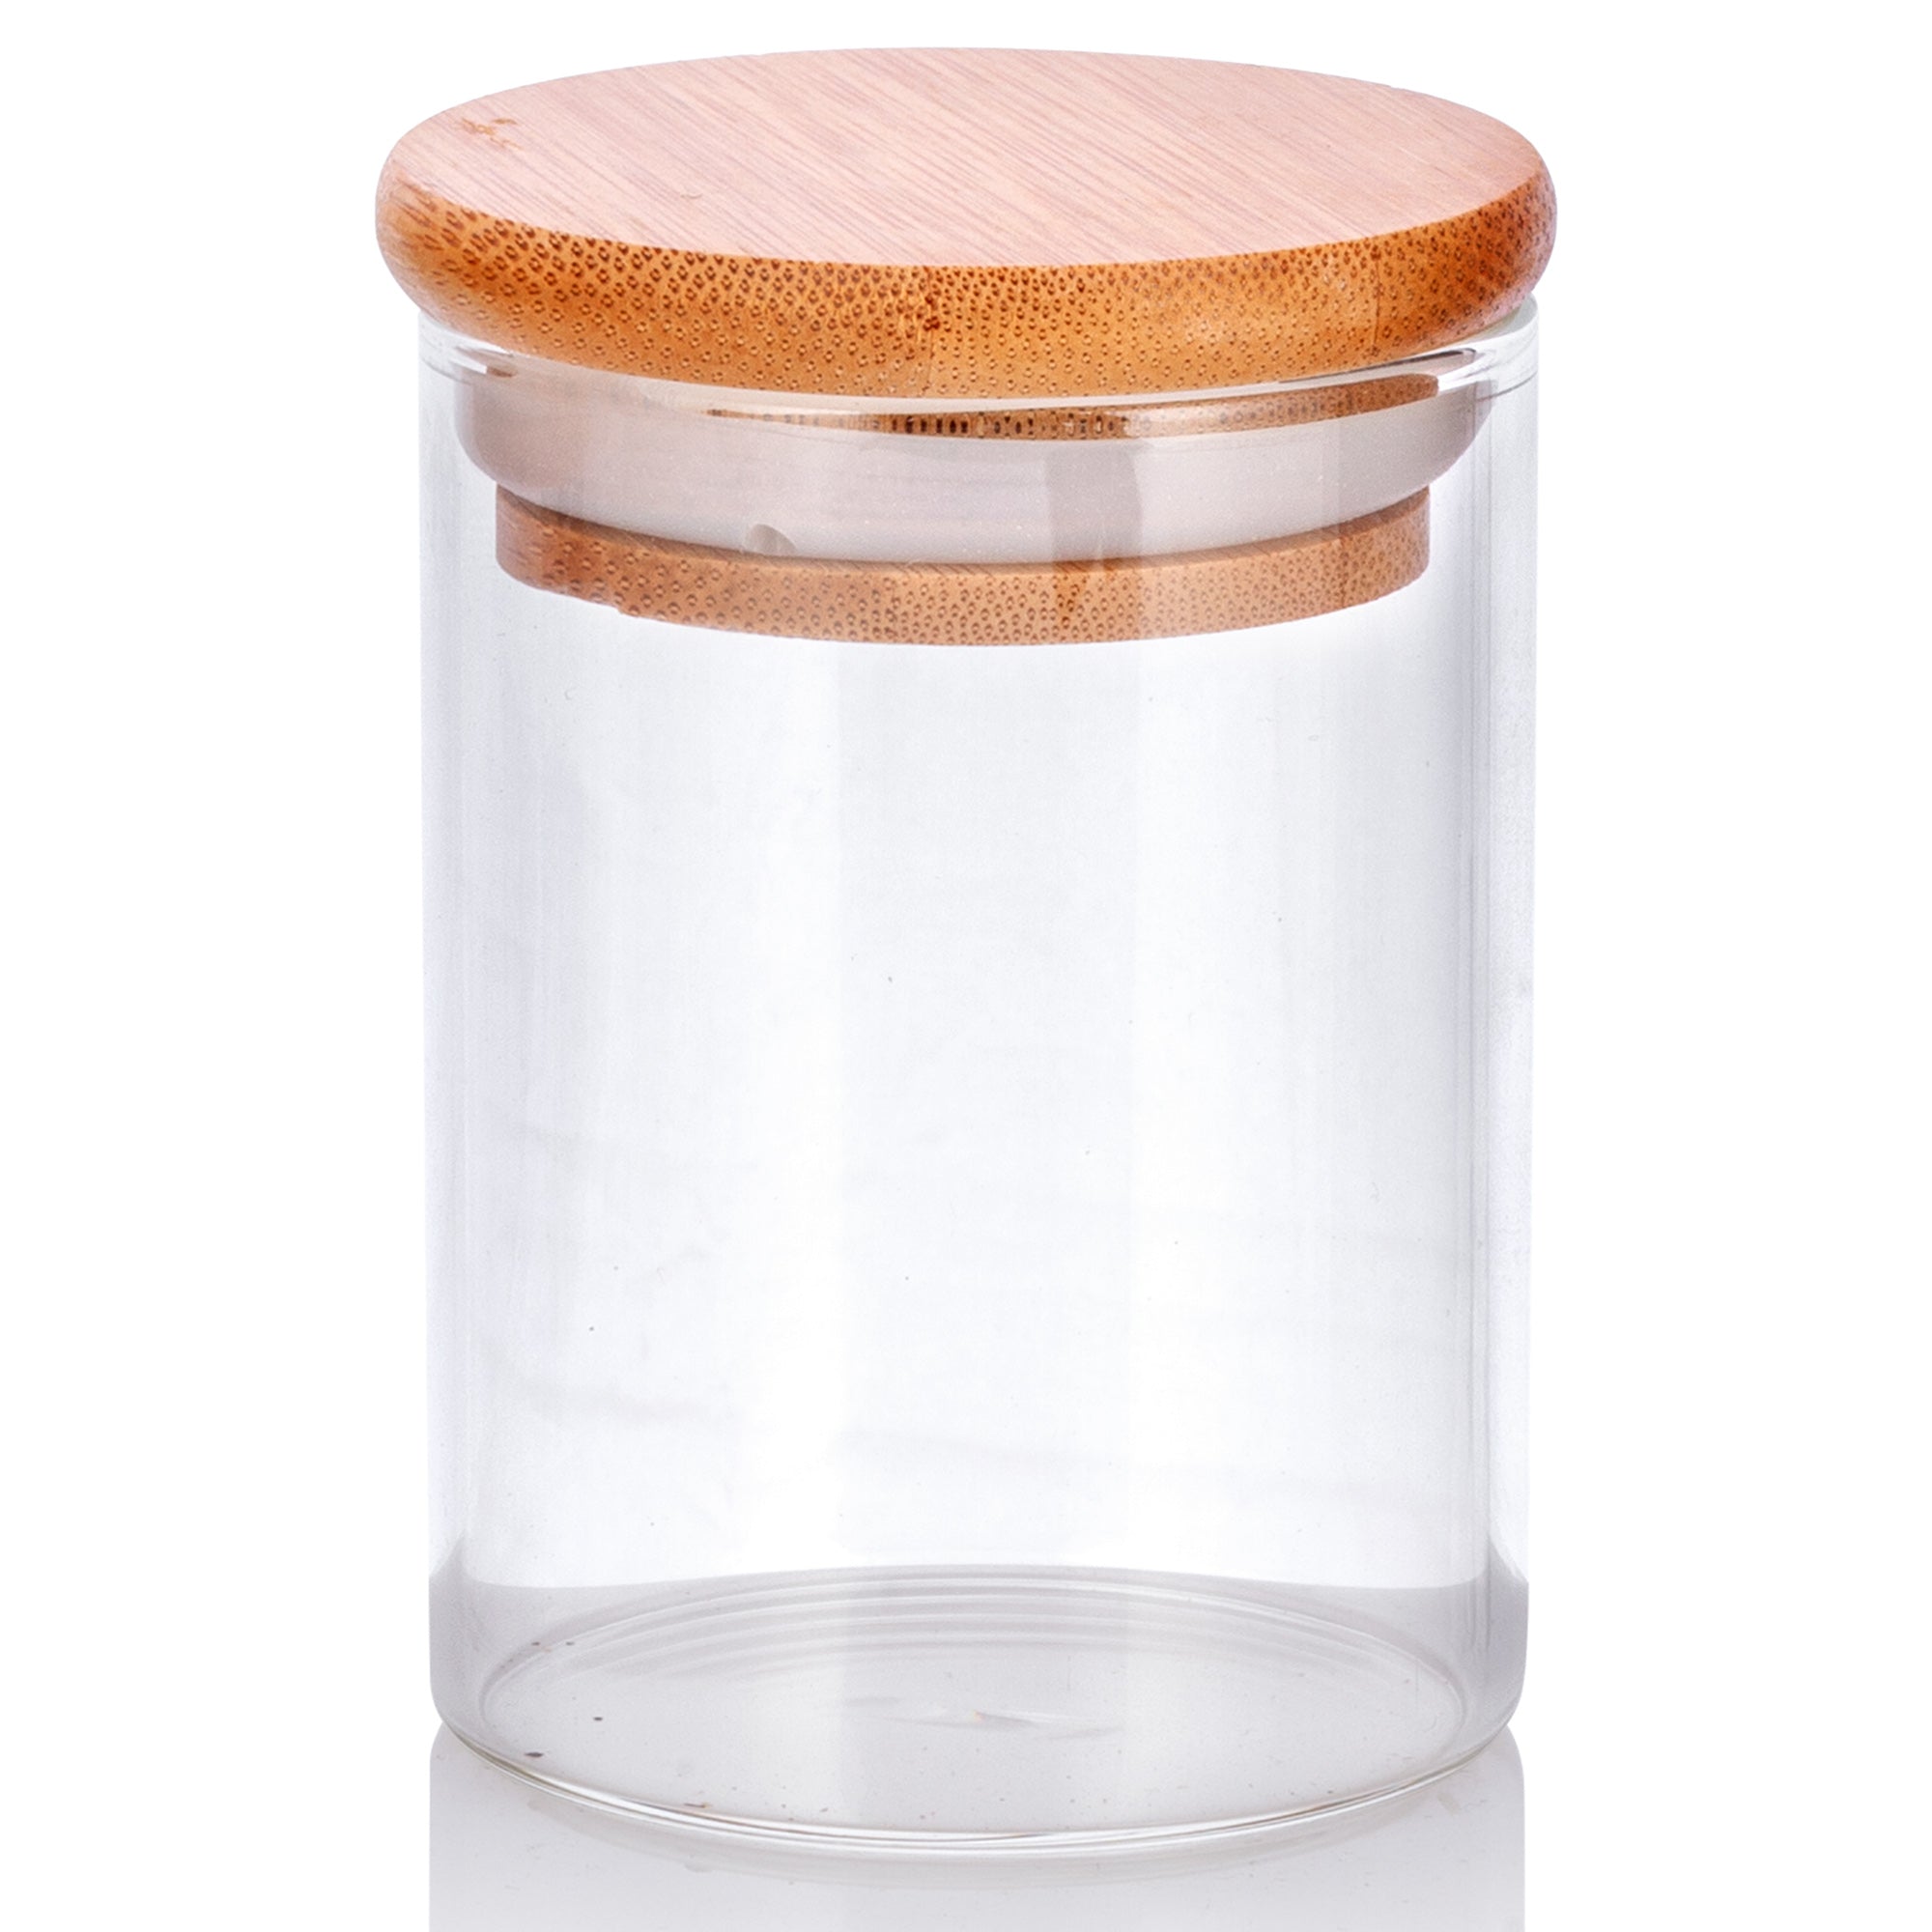 JUVITUS 10 oz Clear Glass Tall Jar with Bamboo Silicone Sealed Lid (6 Pack)